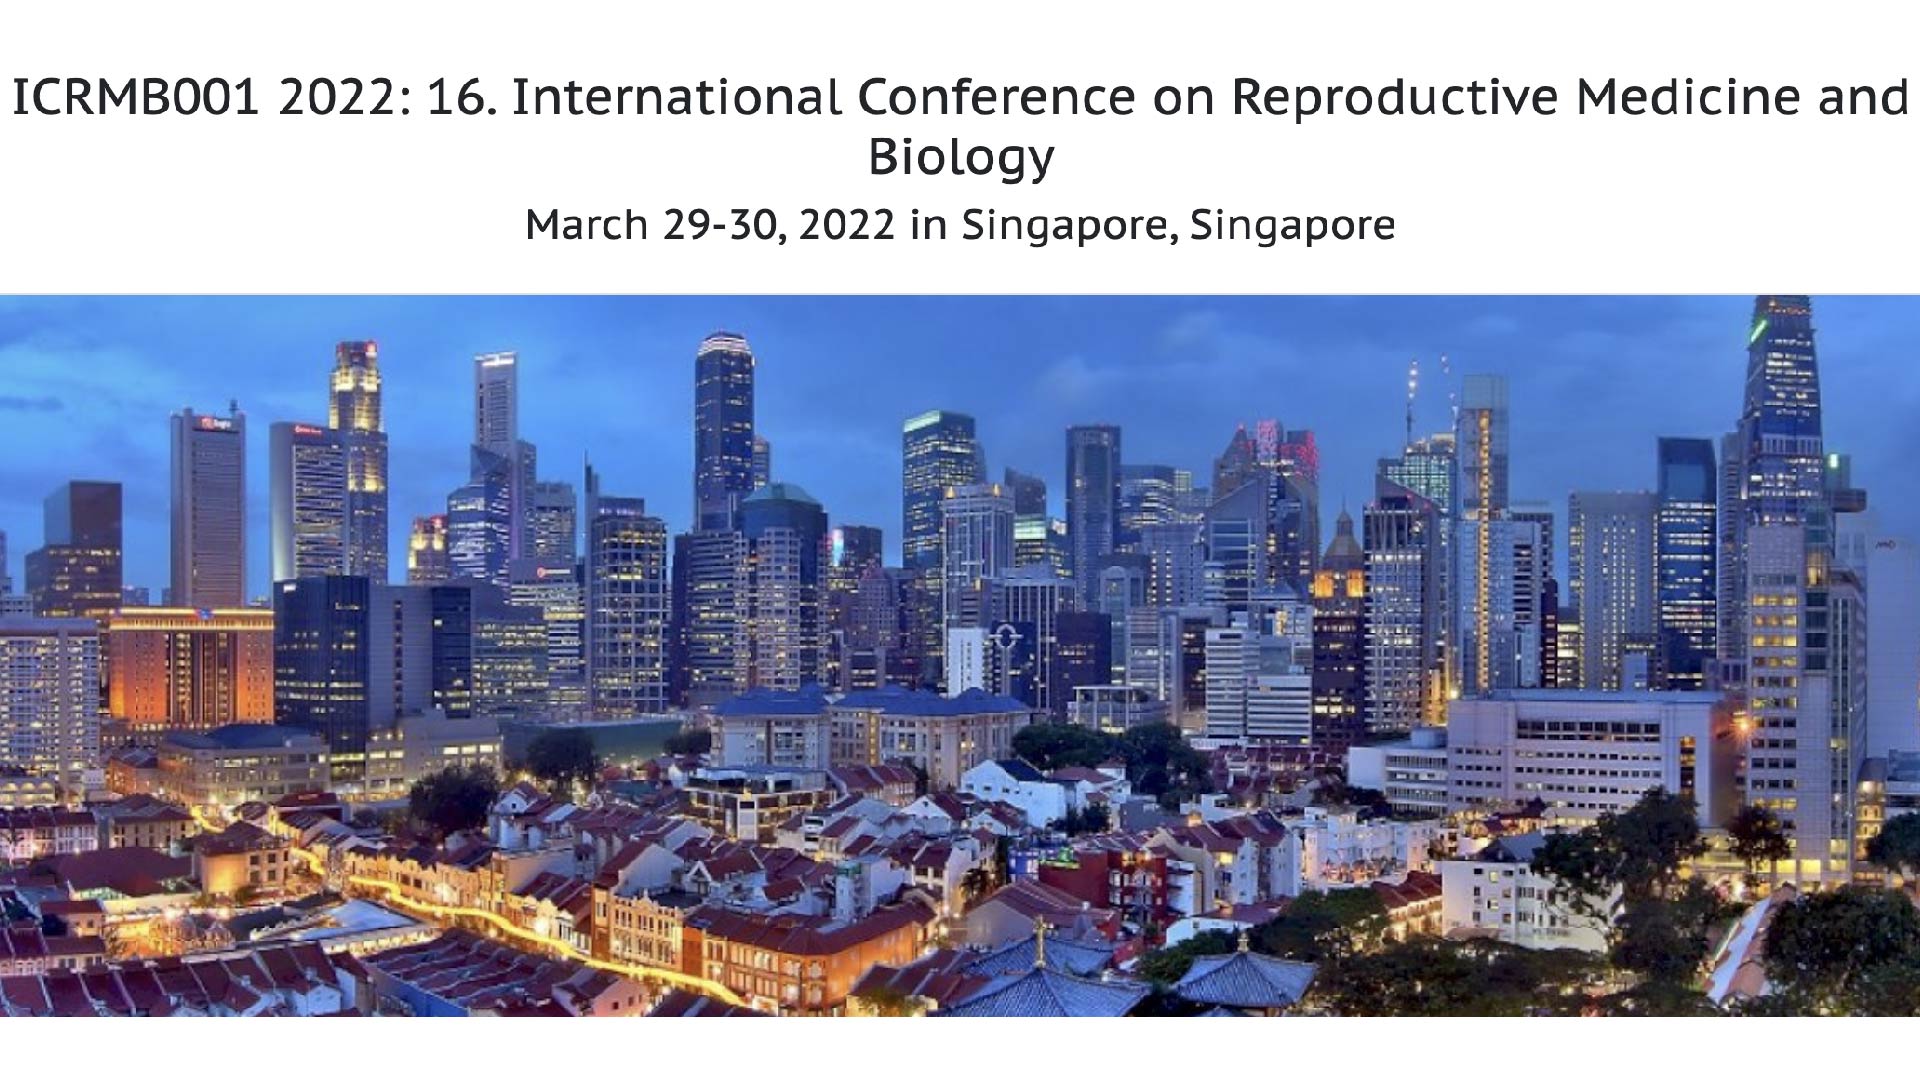 International Conference on Reproductive Medicine and Biology (ICRMB) 2022